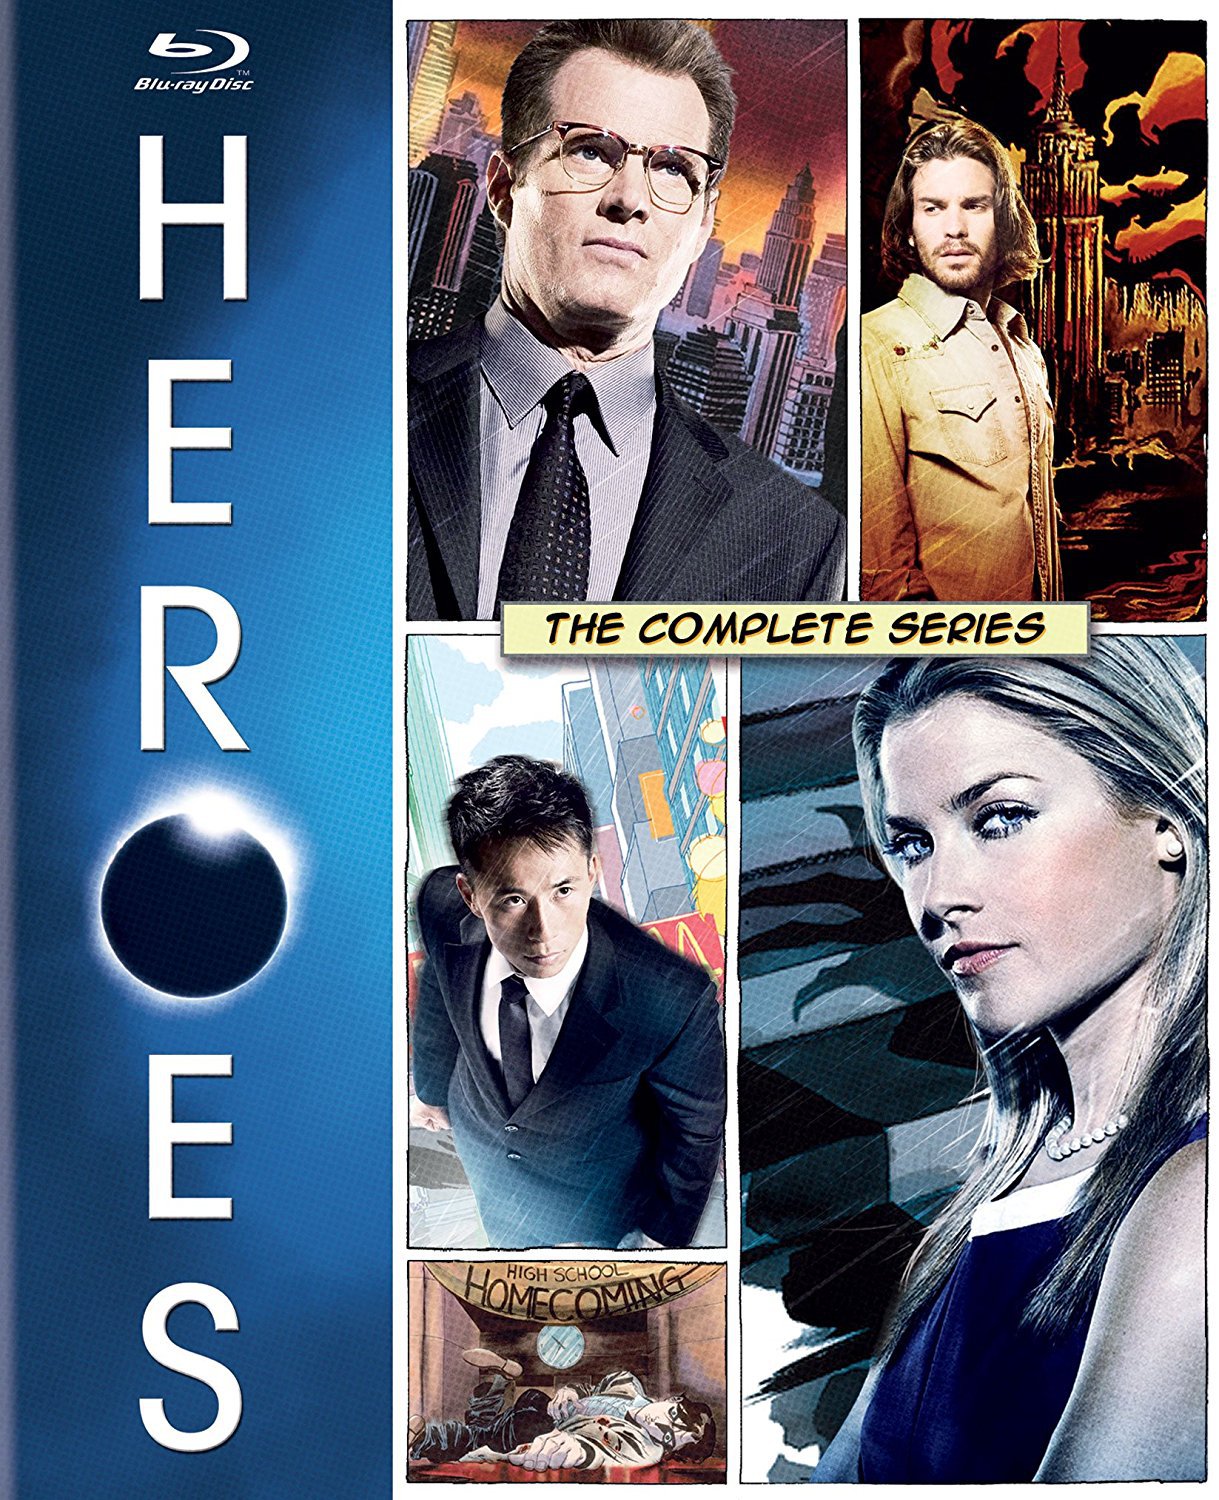 Heroes: The Complete Series